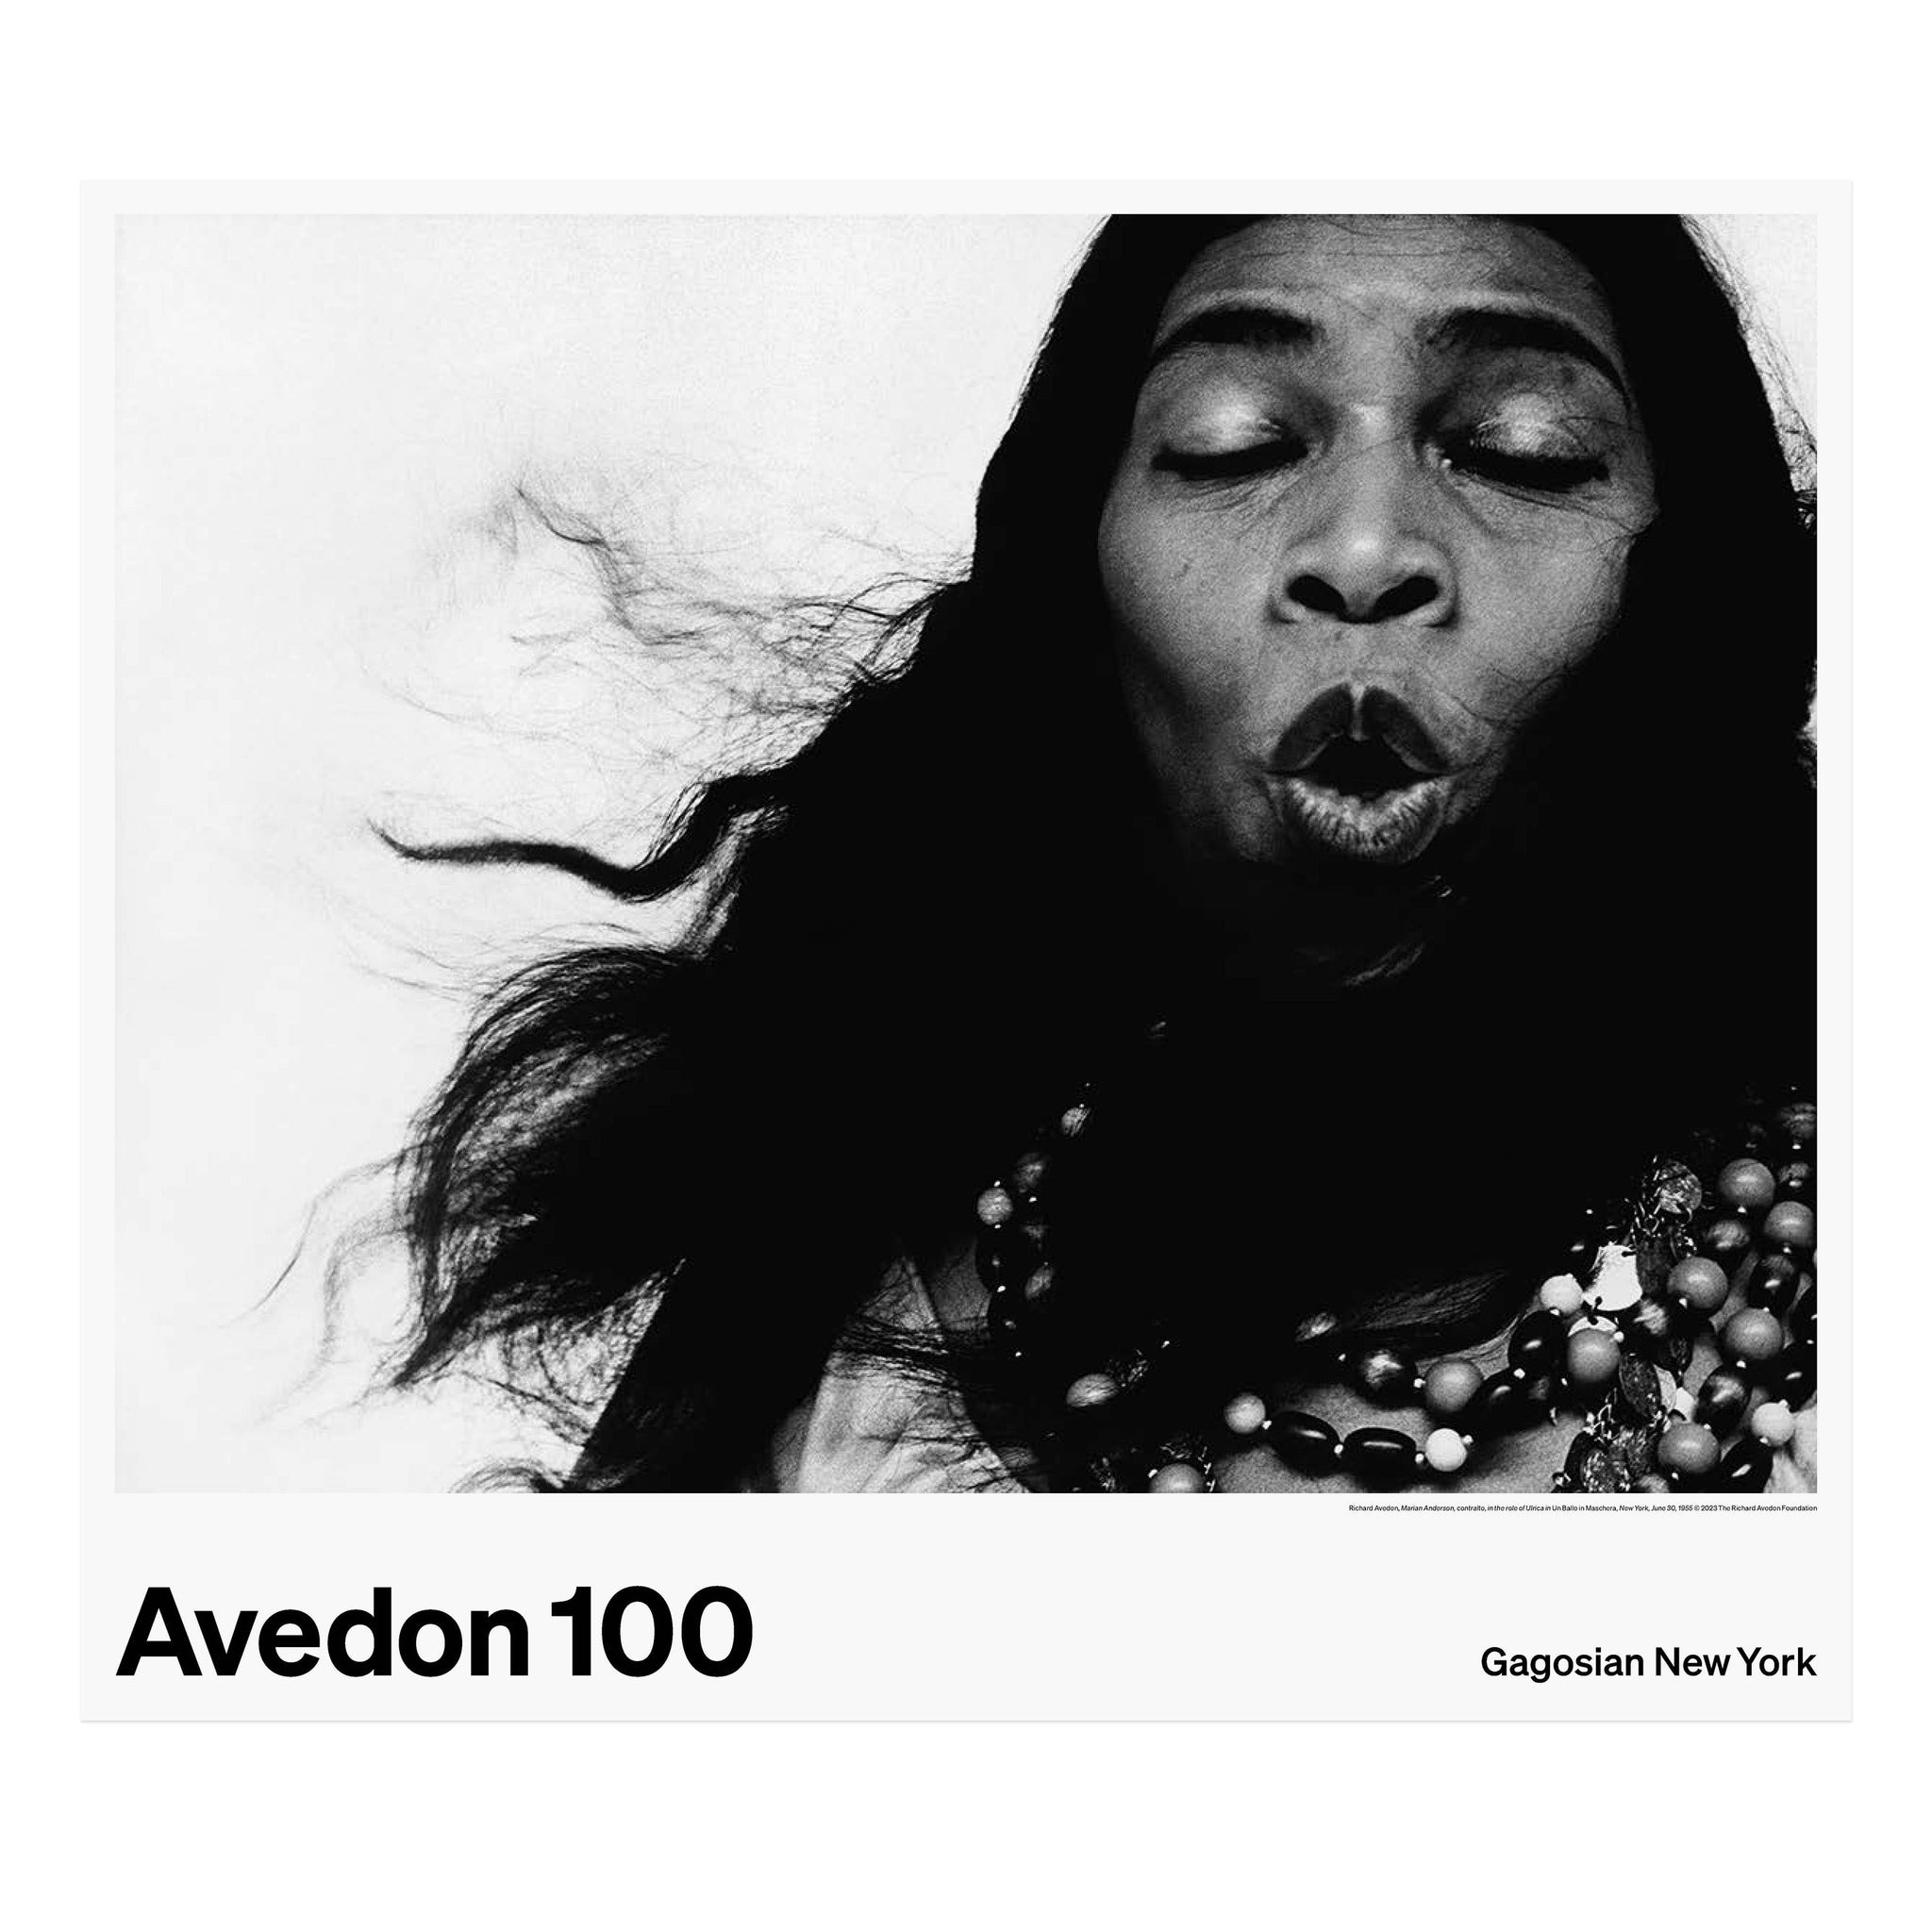 Poster featuring a photograph by Richard Avedon of Marian Anderson